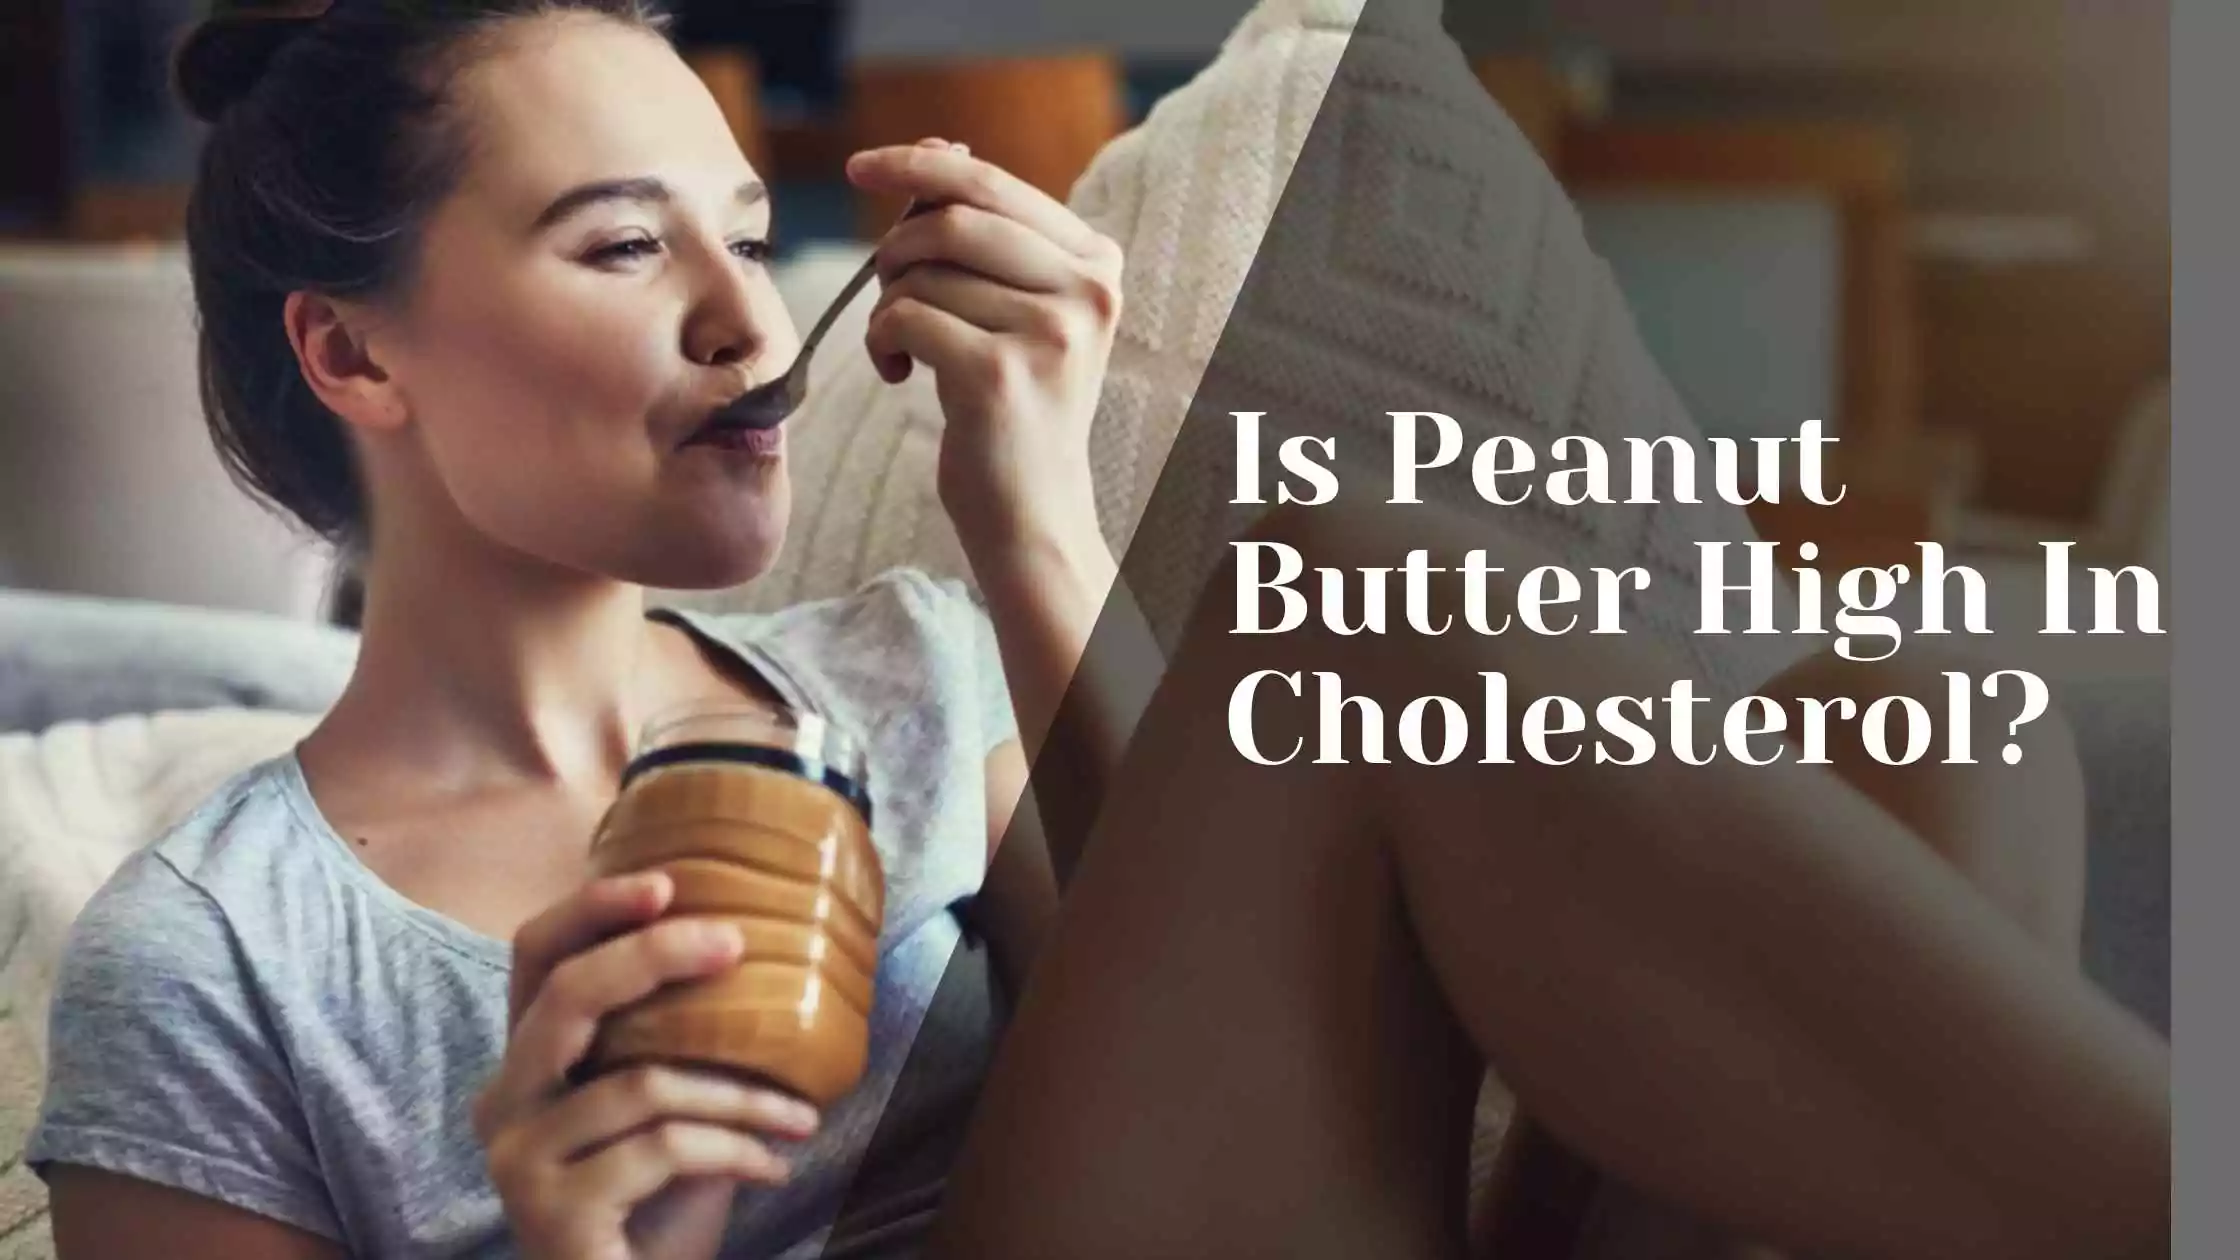 Is Peanut Butter High In Cholesterol: Should I Curb It To Control My Cholesterol